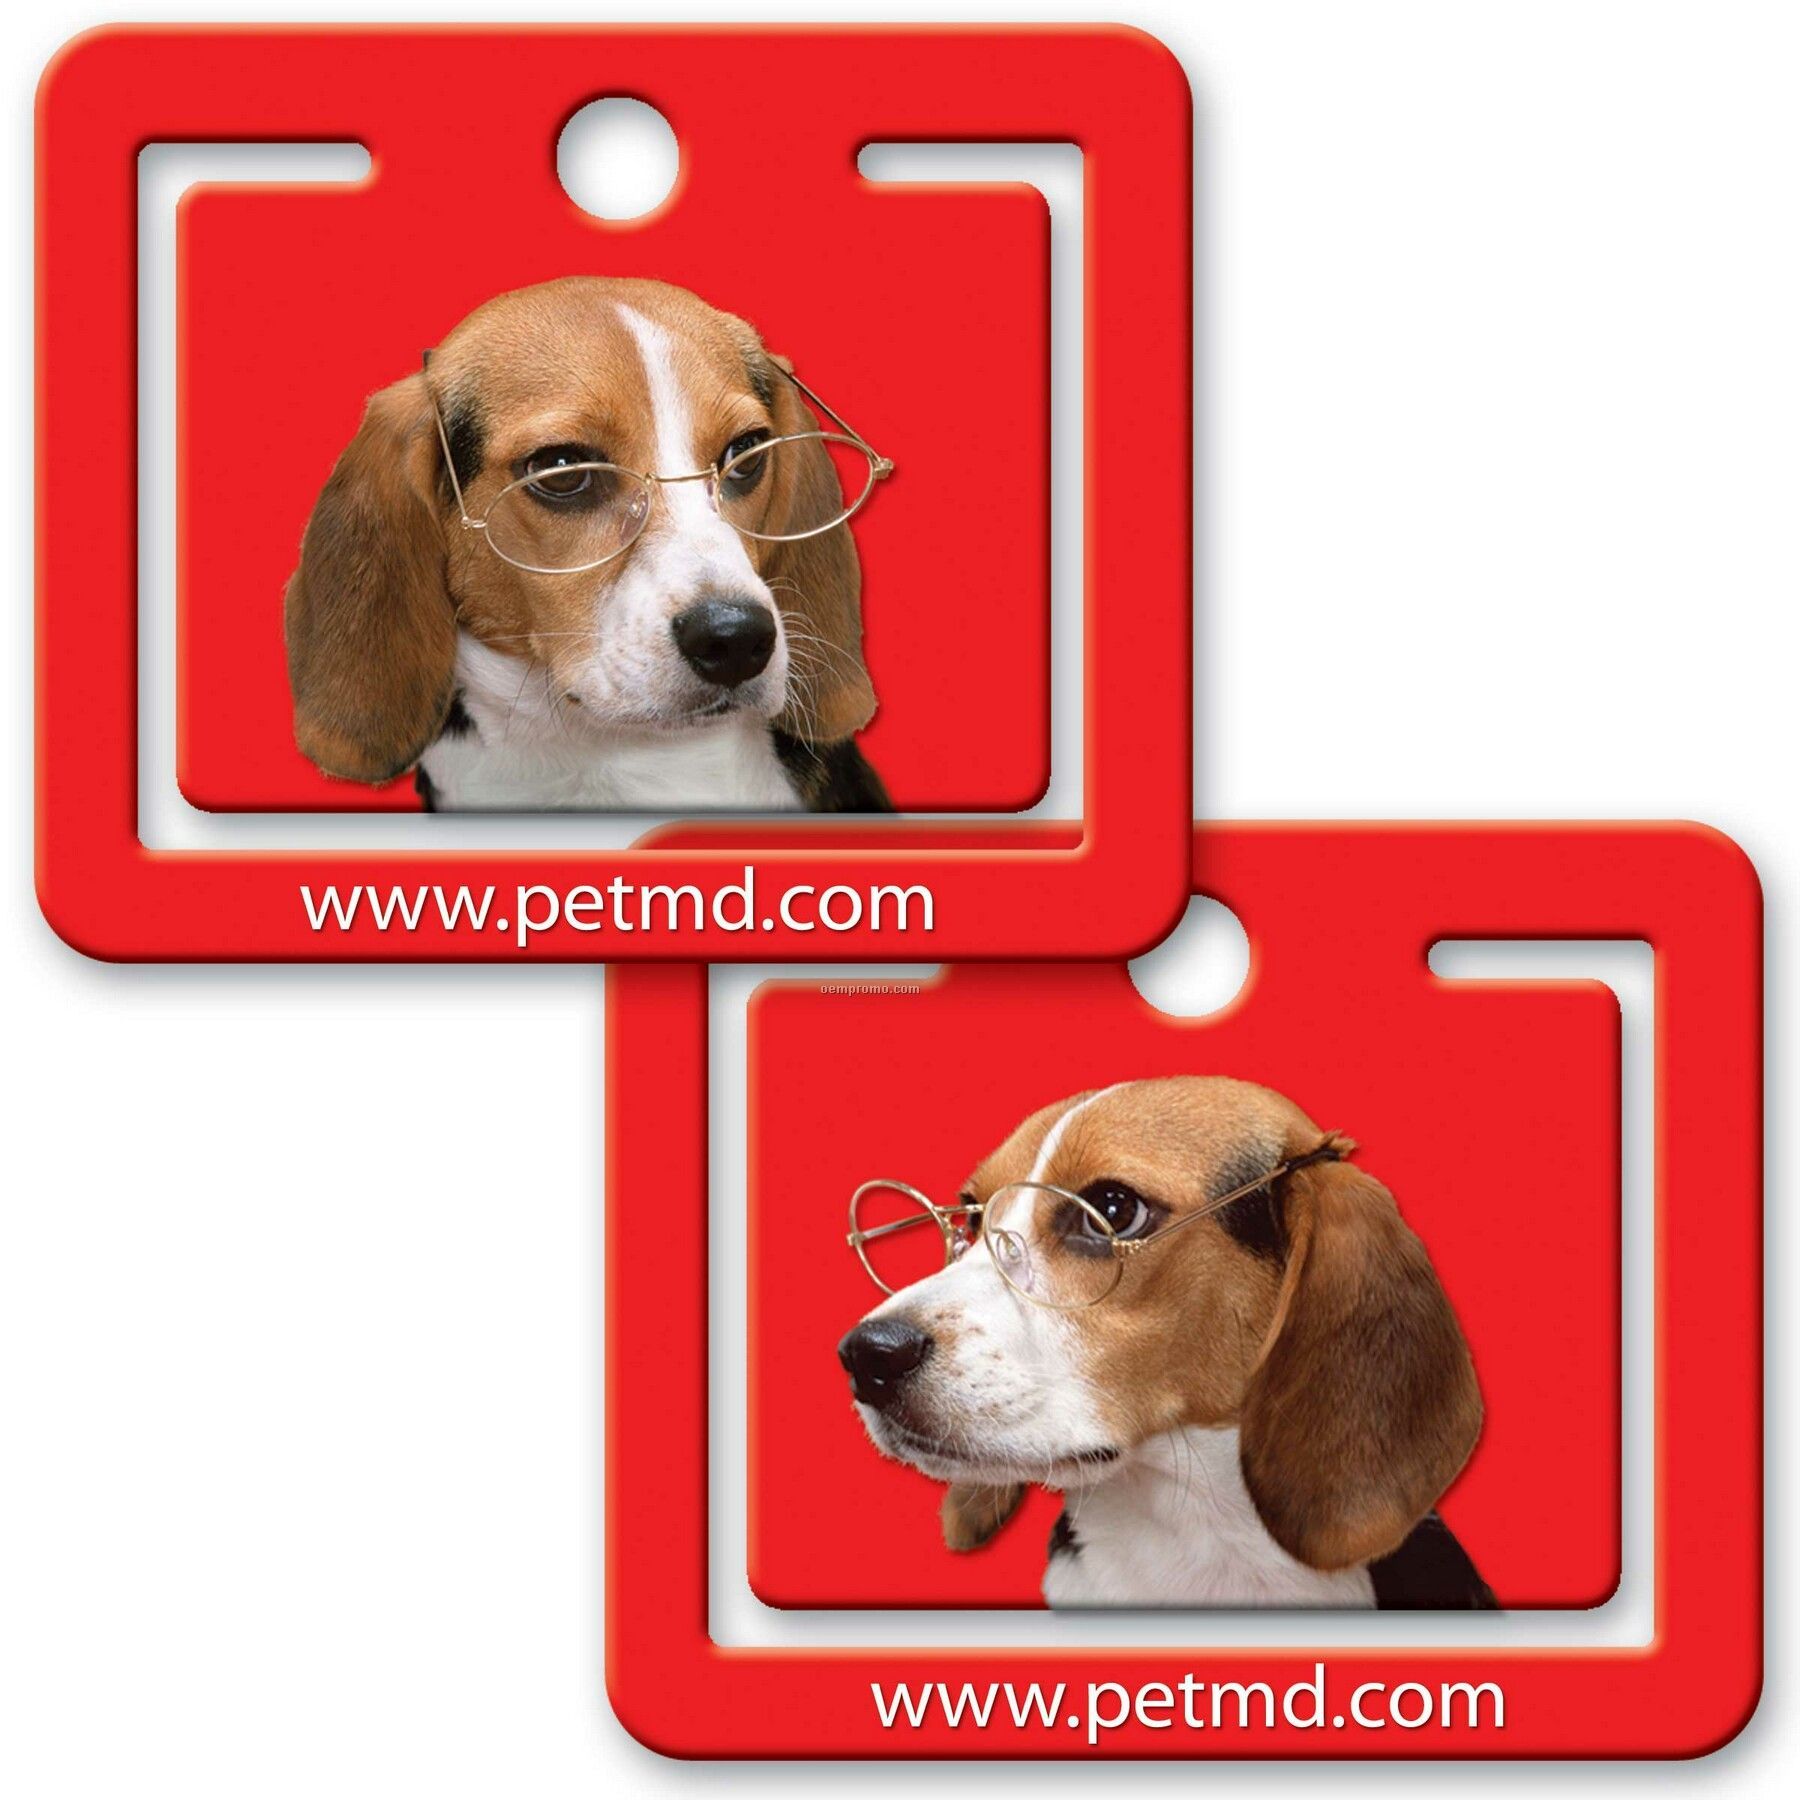 Paper Clip W/3d Lenticular Image Of A Beagle Wearing Glasses (Custom)